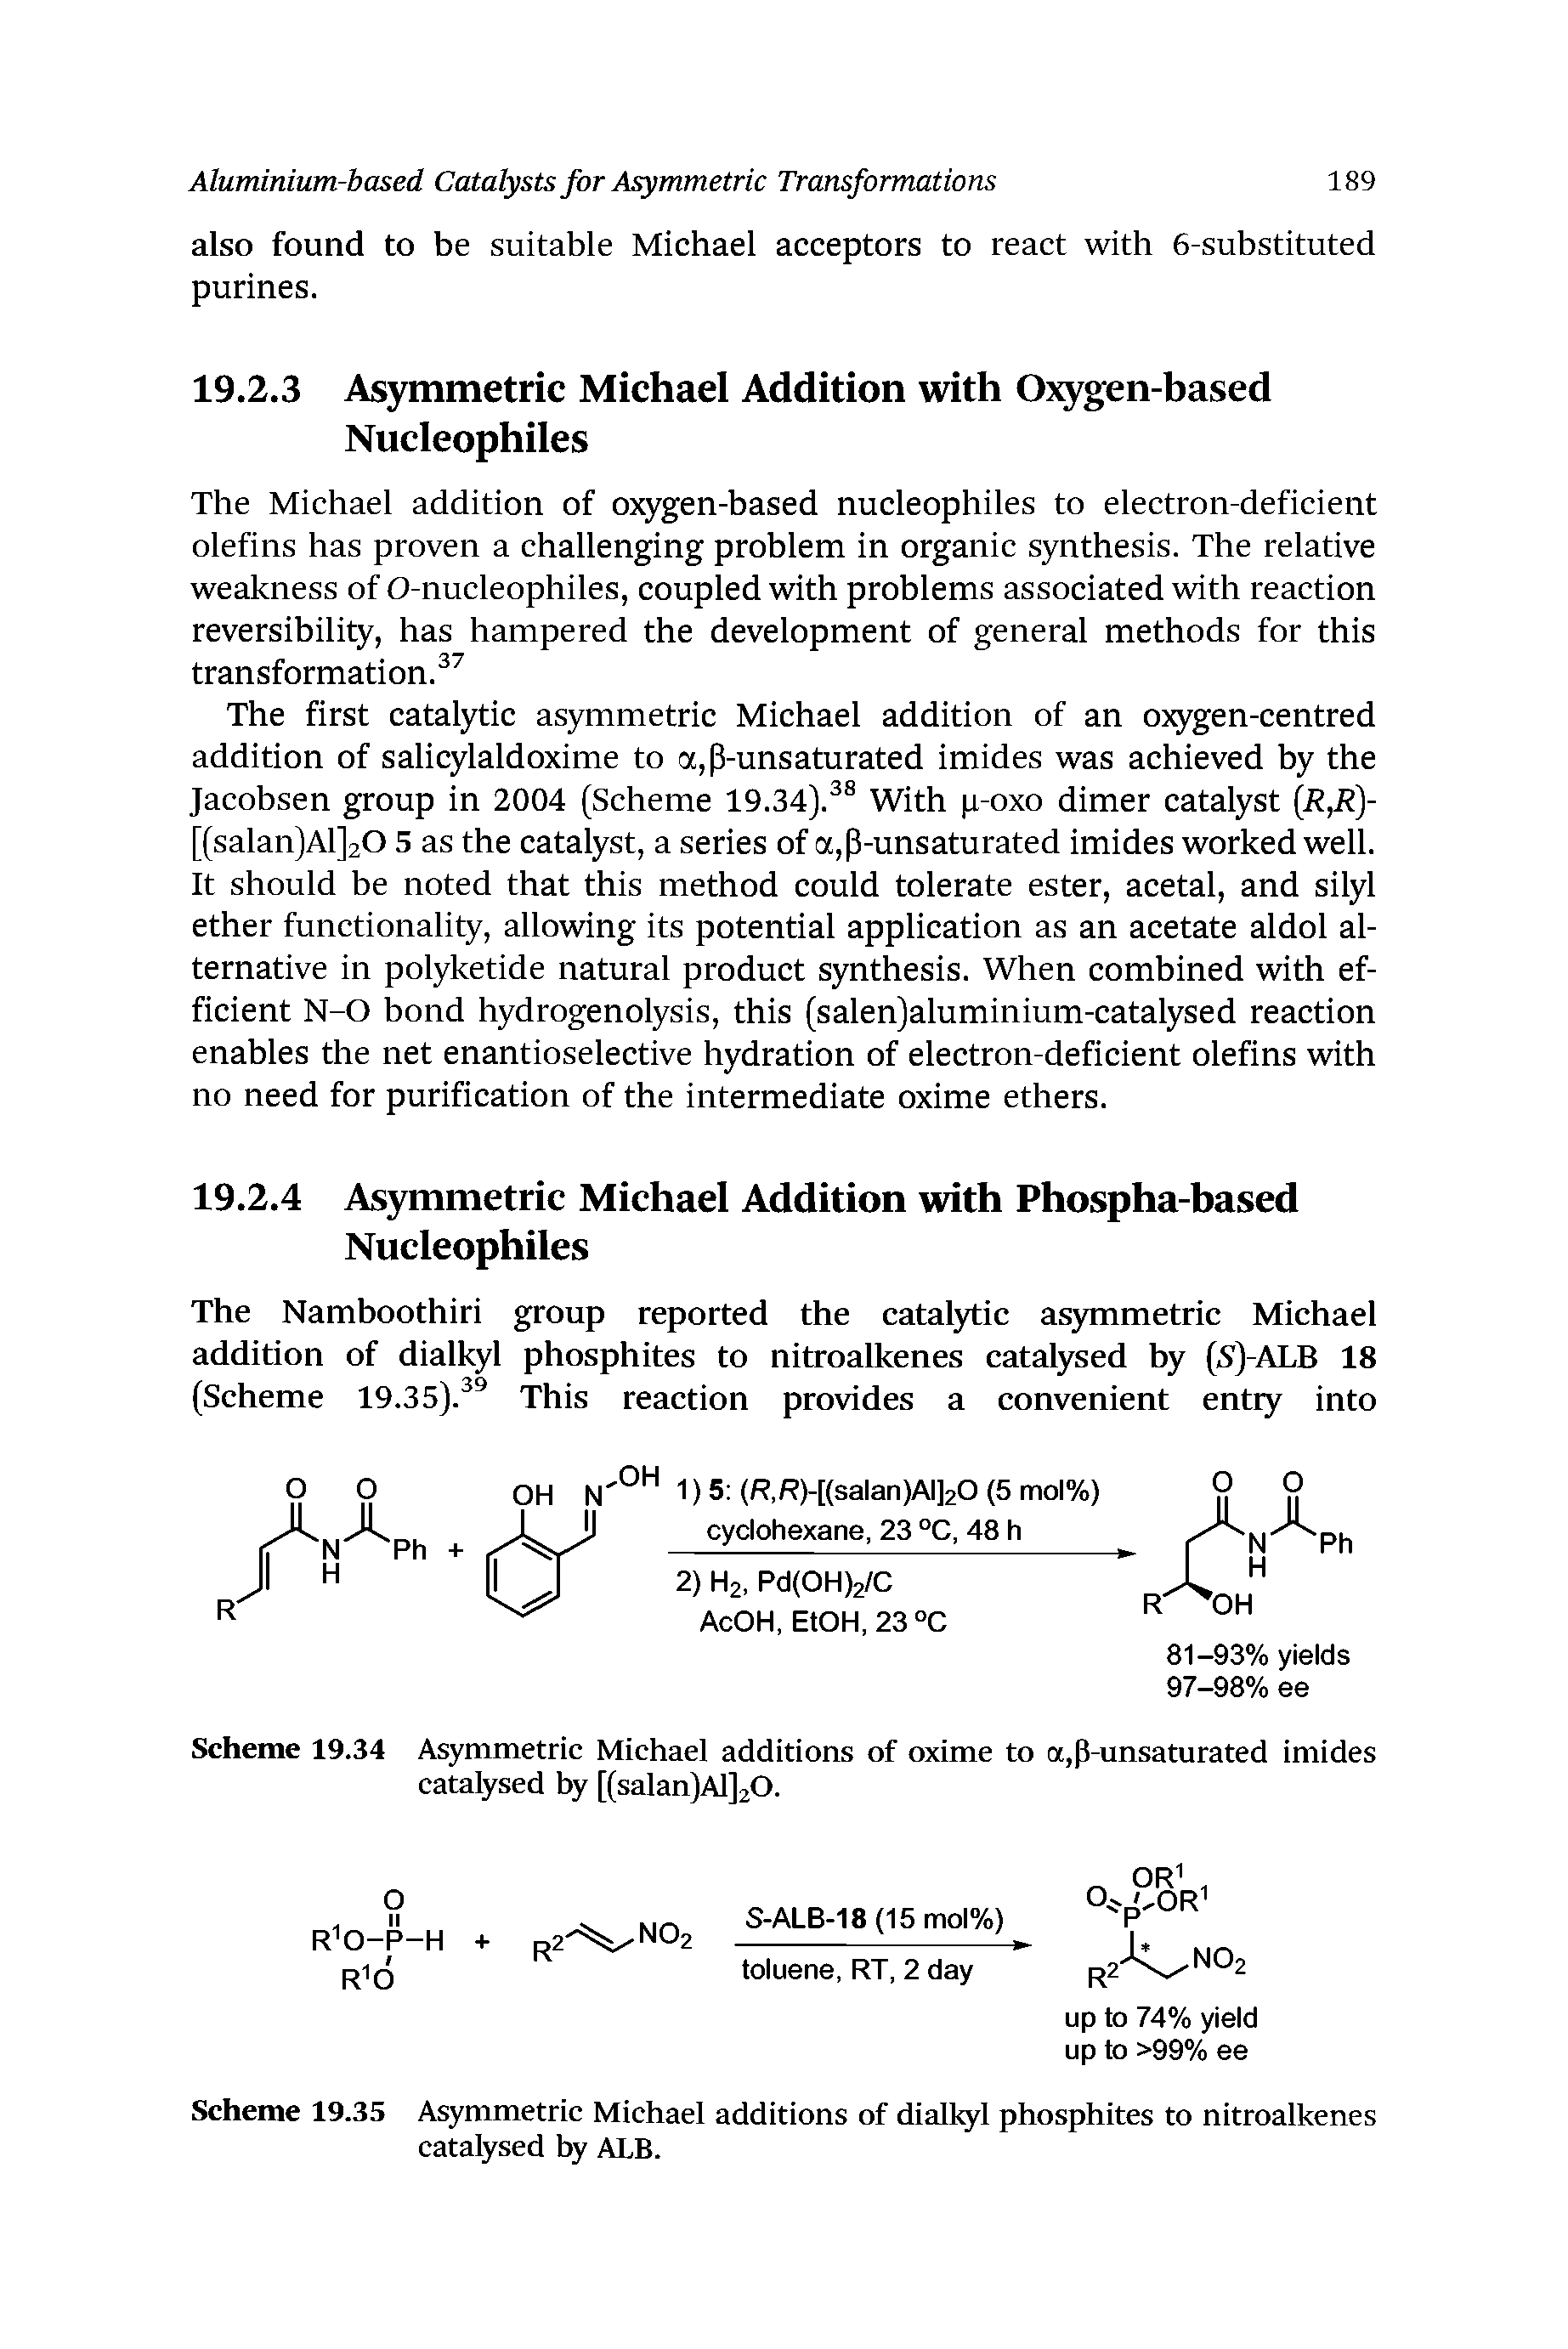 Scheme 19.34 Asymmetric Michael additions of oxime to a,p-unsaturated imides catalysed 1 [(salanjAlJjO.